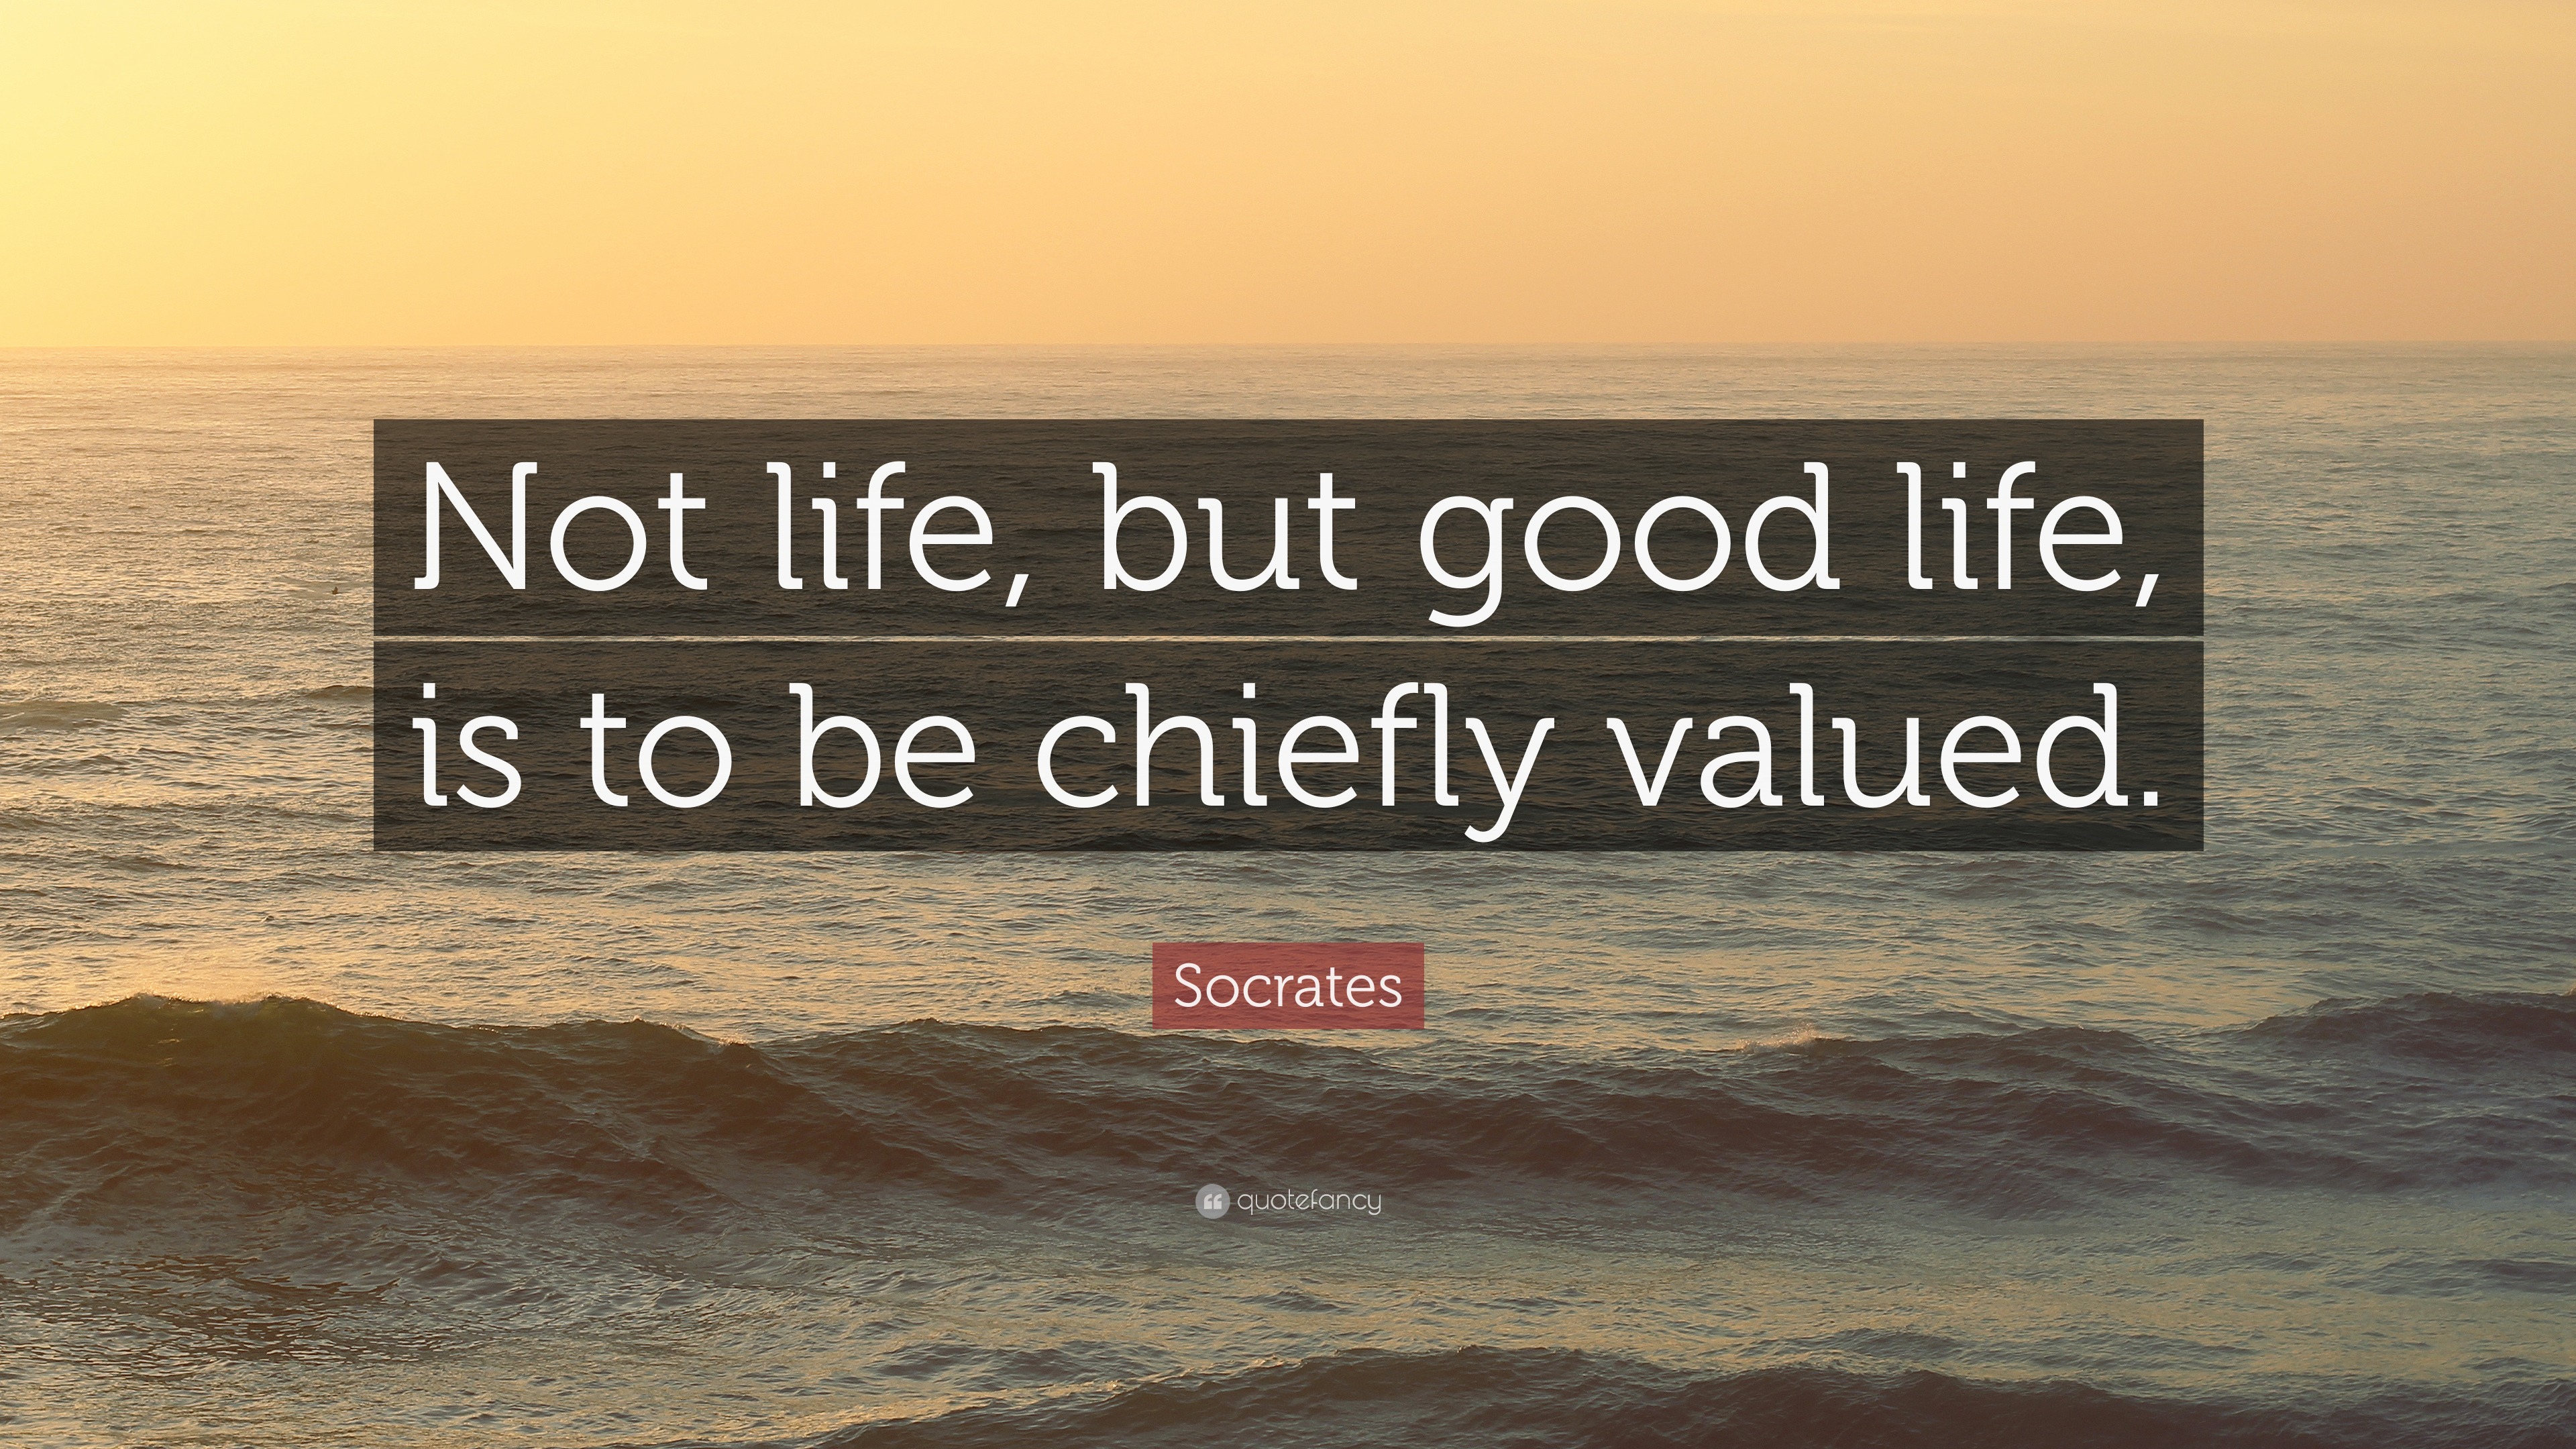 Socrates Quote “Not life but good life is to be chiefly valued